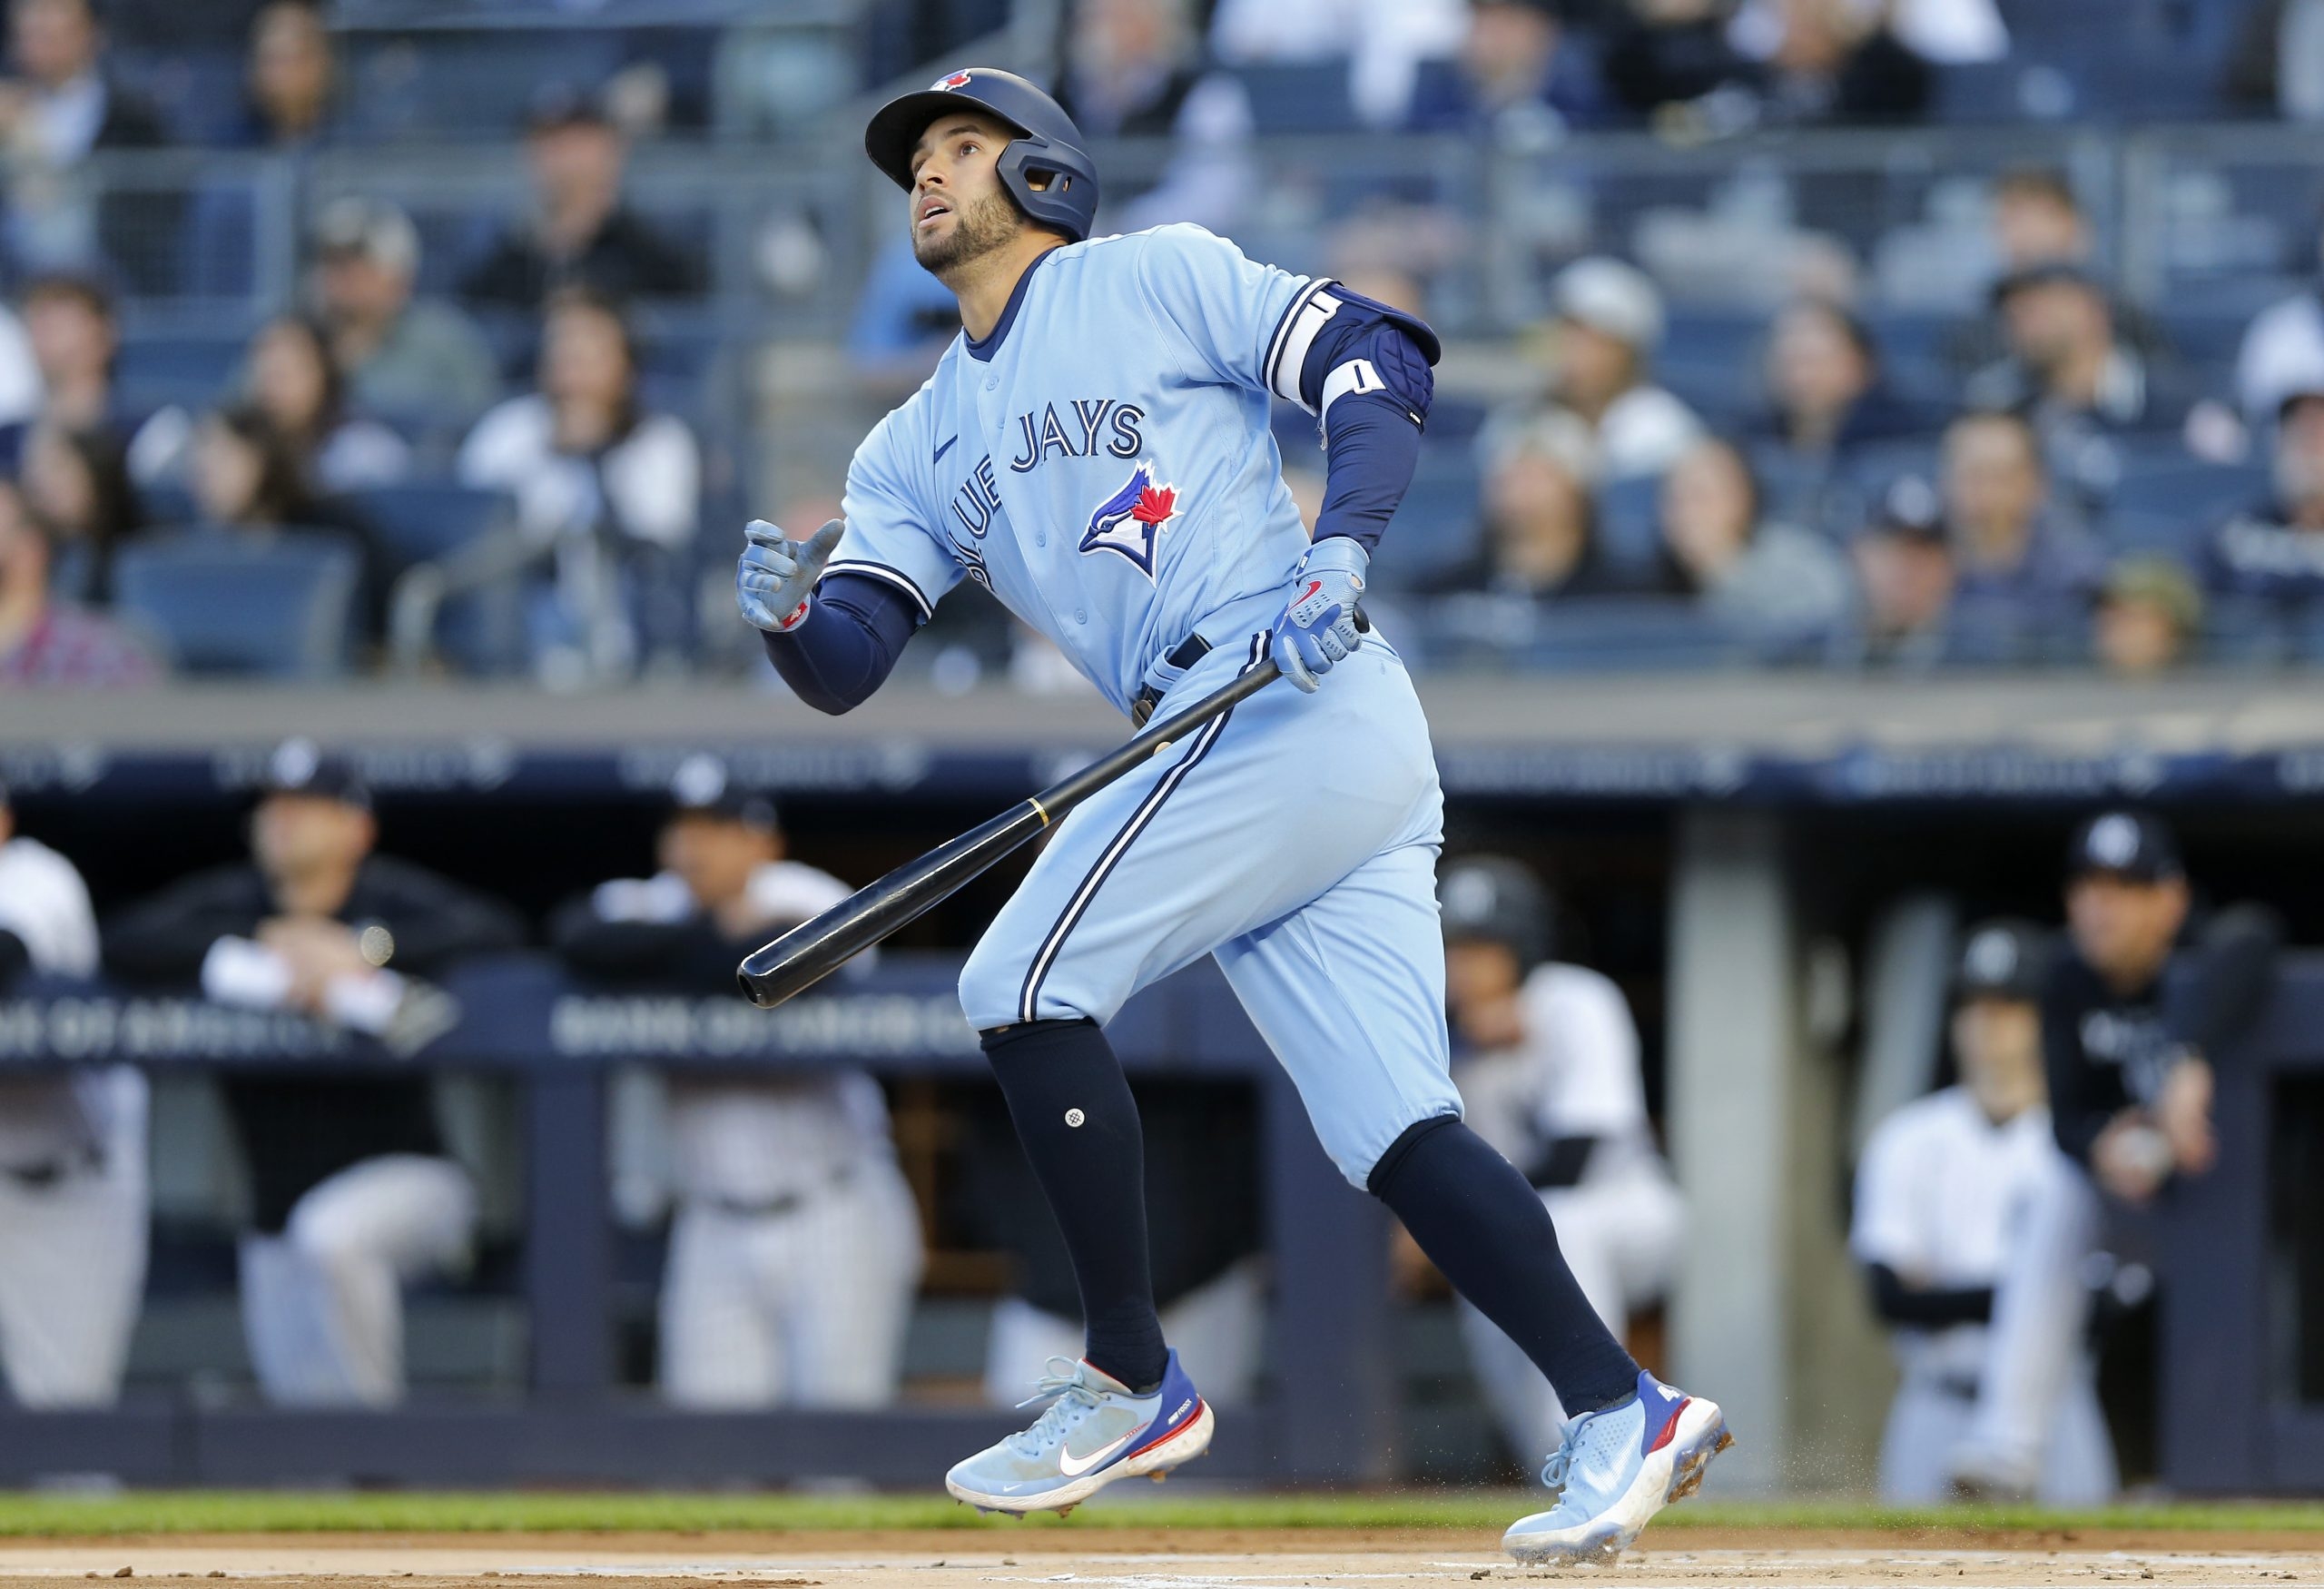 Hitting is as hard as it's ever been' Blue Jays' George Springer says of  baseball in 2022